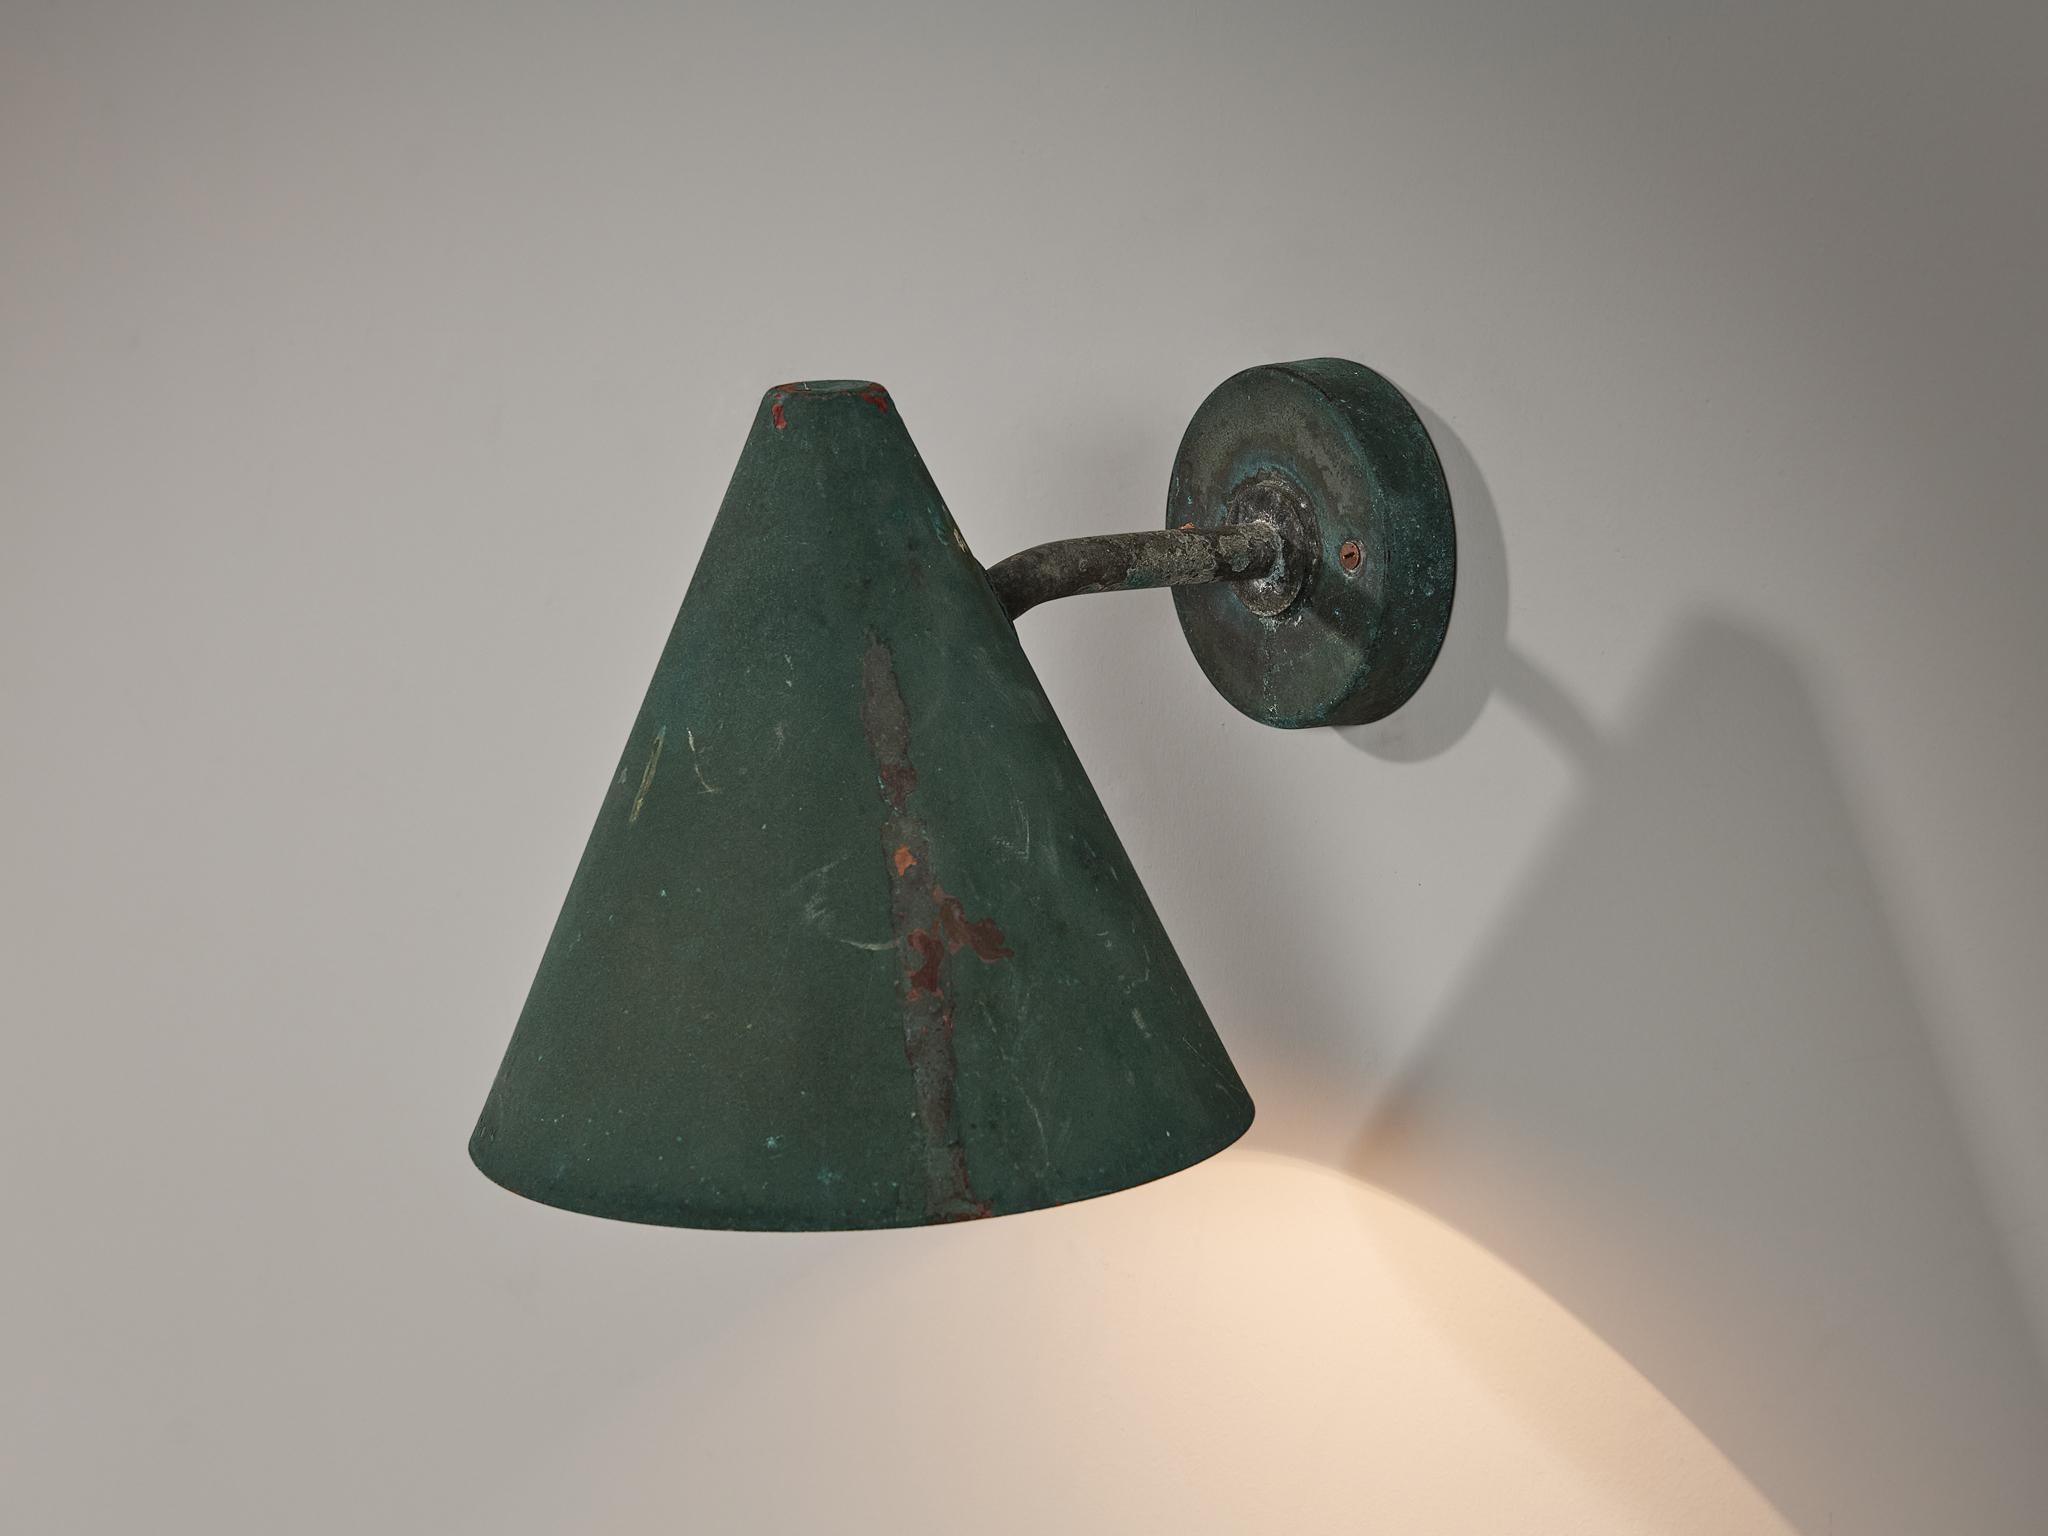 Hans-Agne Jakobsson for Hans-Agne Jakobsson AB in Markaryd, wall light ‘Tratten’, copper, Sweden, 1950s

Hans-Agne Jakobsson designed this wall light 'Tratten', which is crafted from green copper. The conical-shaped shade is secured to a slightly